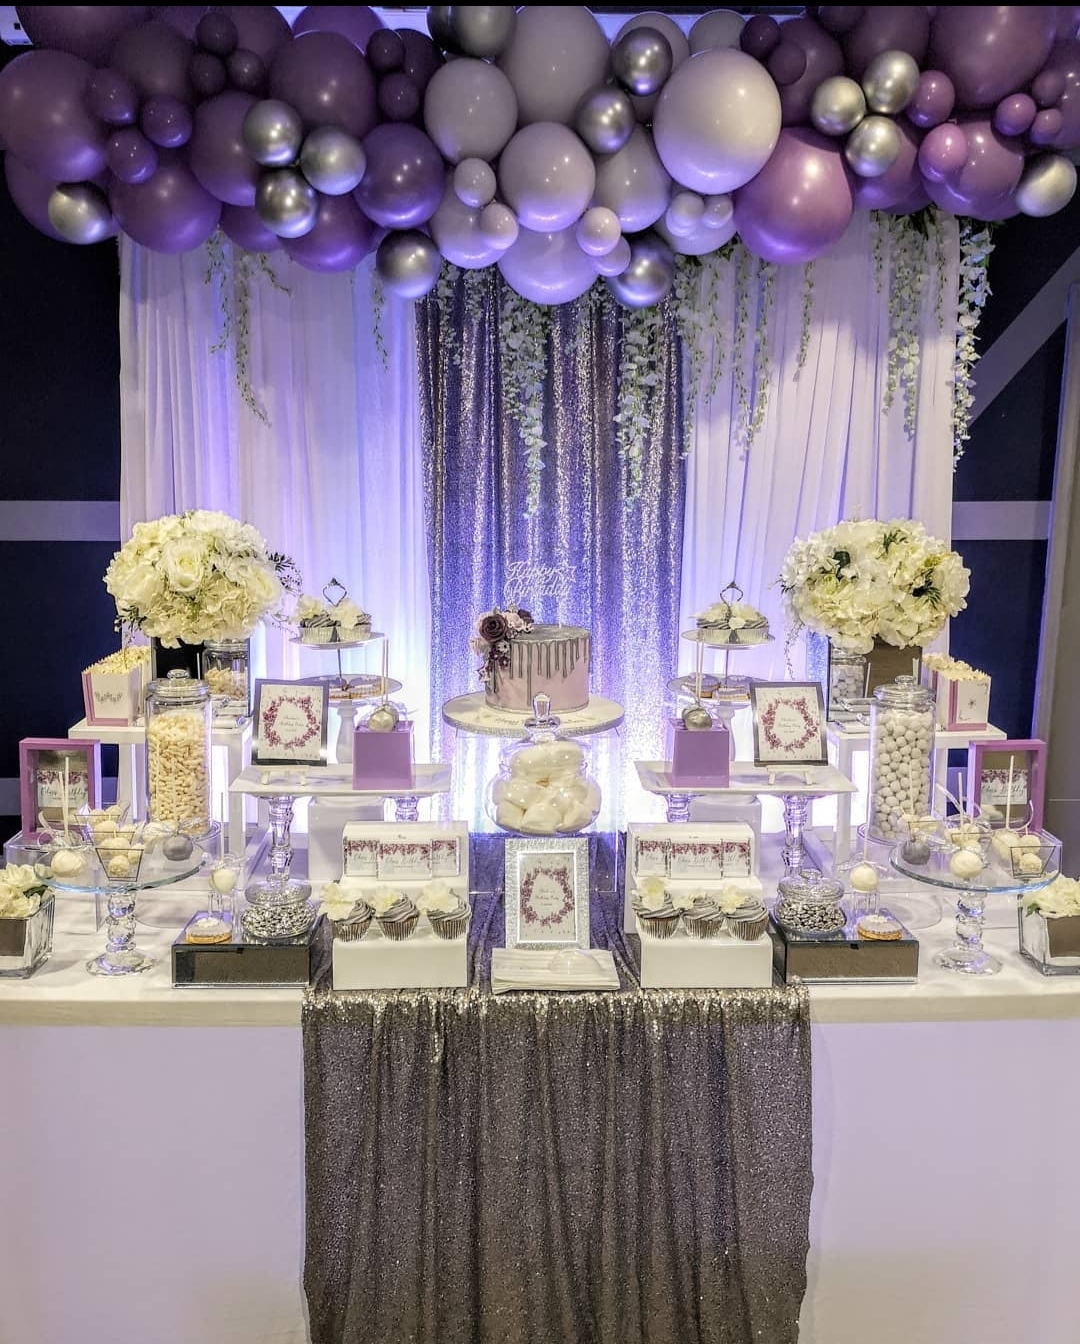 26+ Candy Buffet Ideas For Any Graduation Party That Will Impress Your Guests